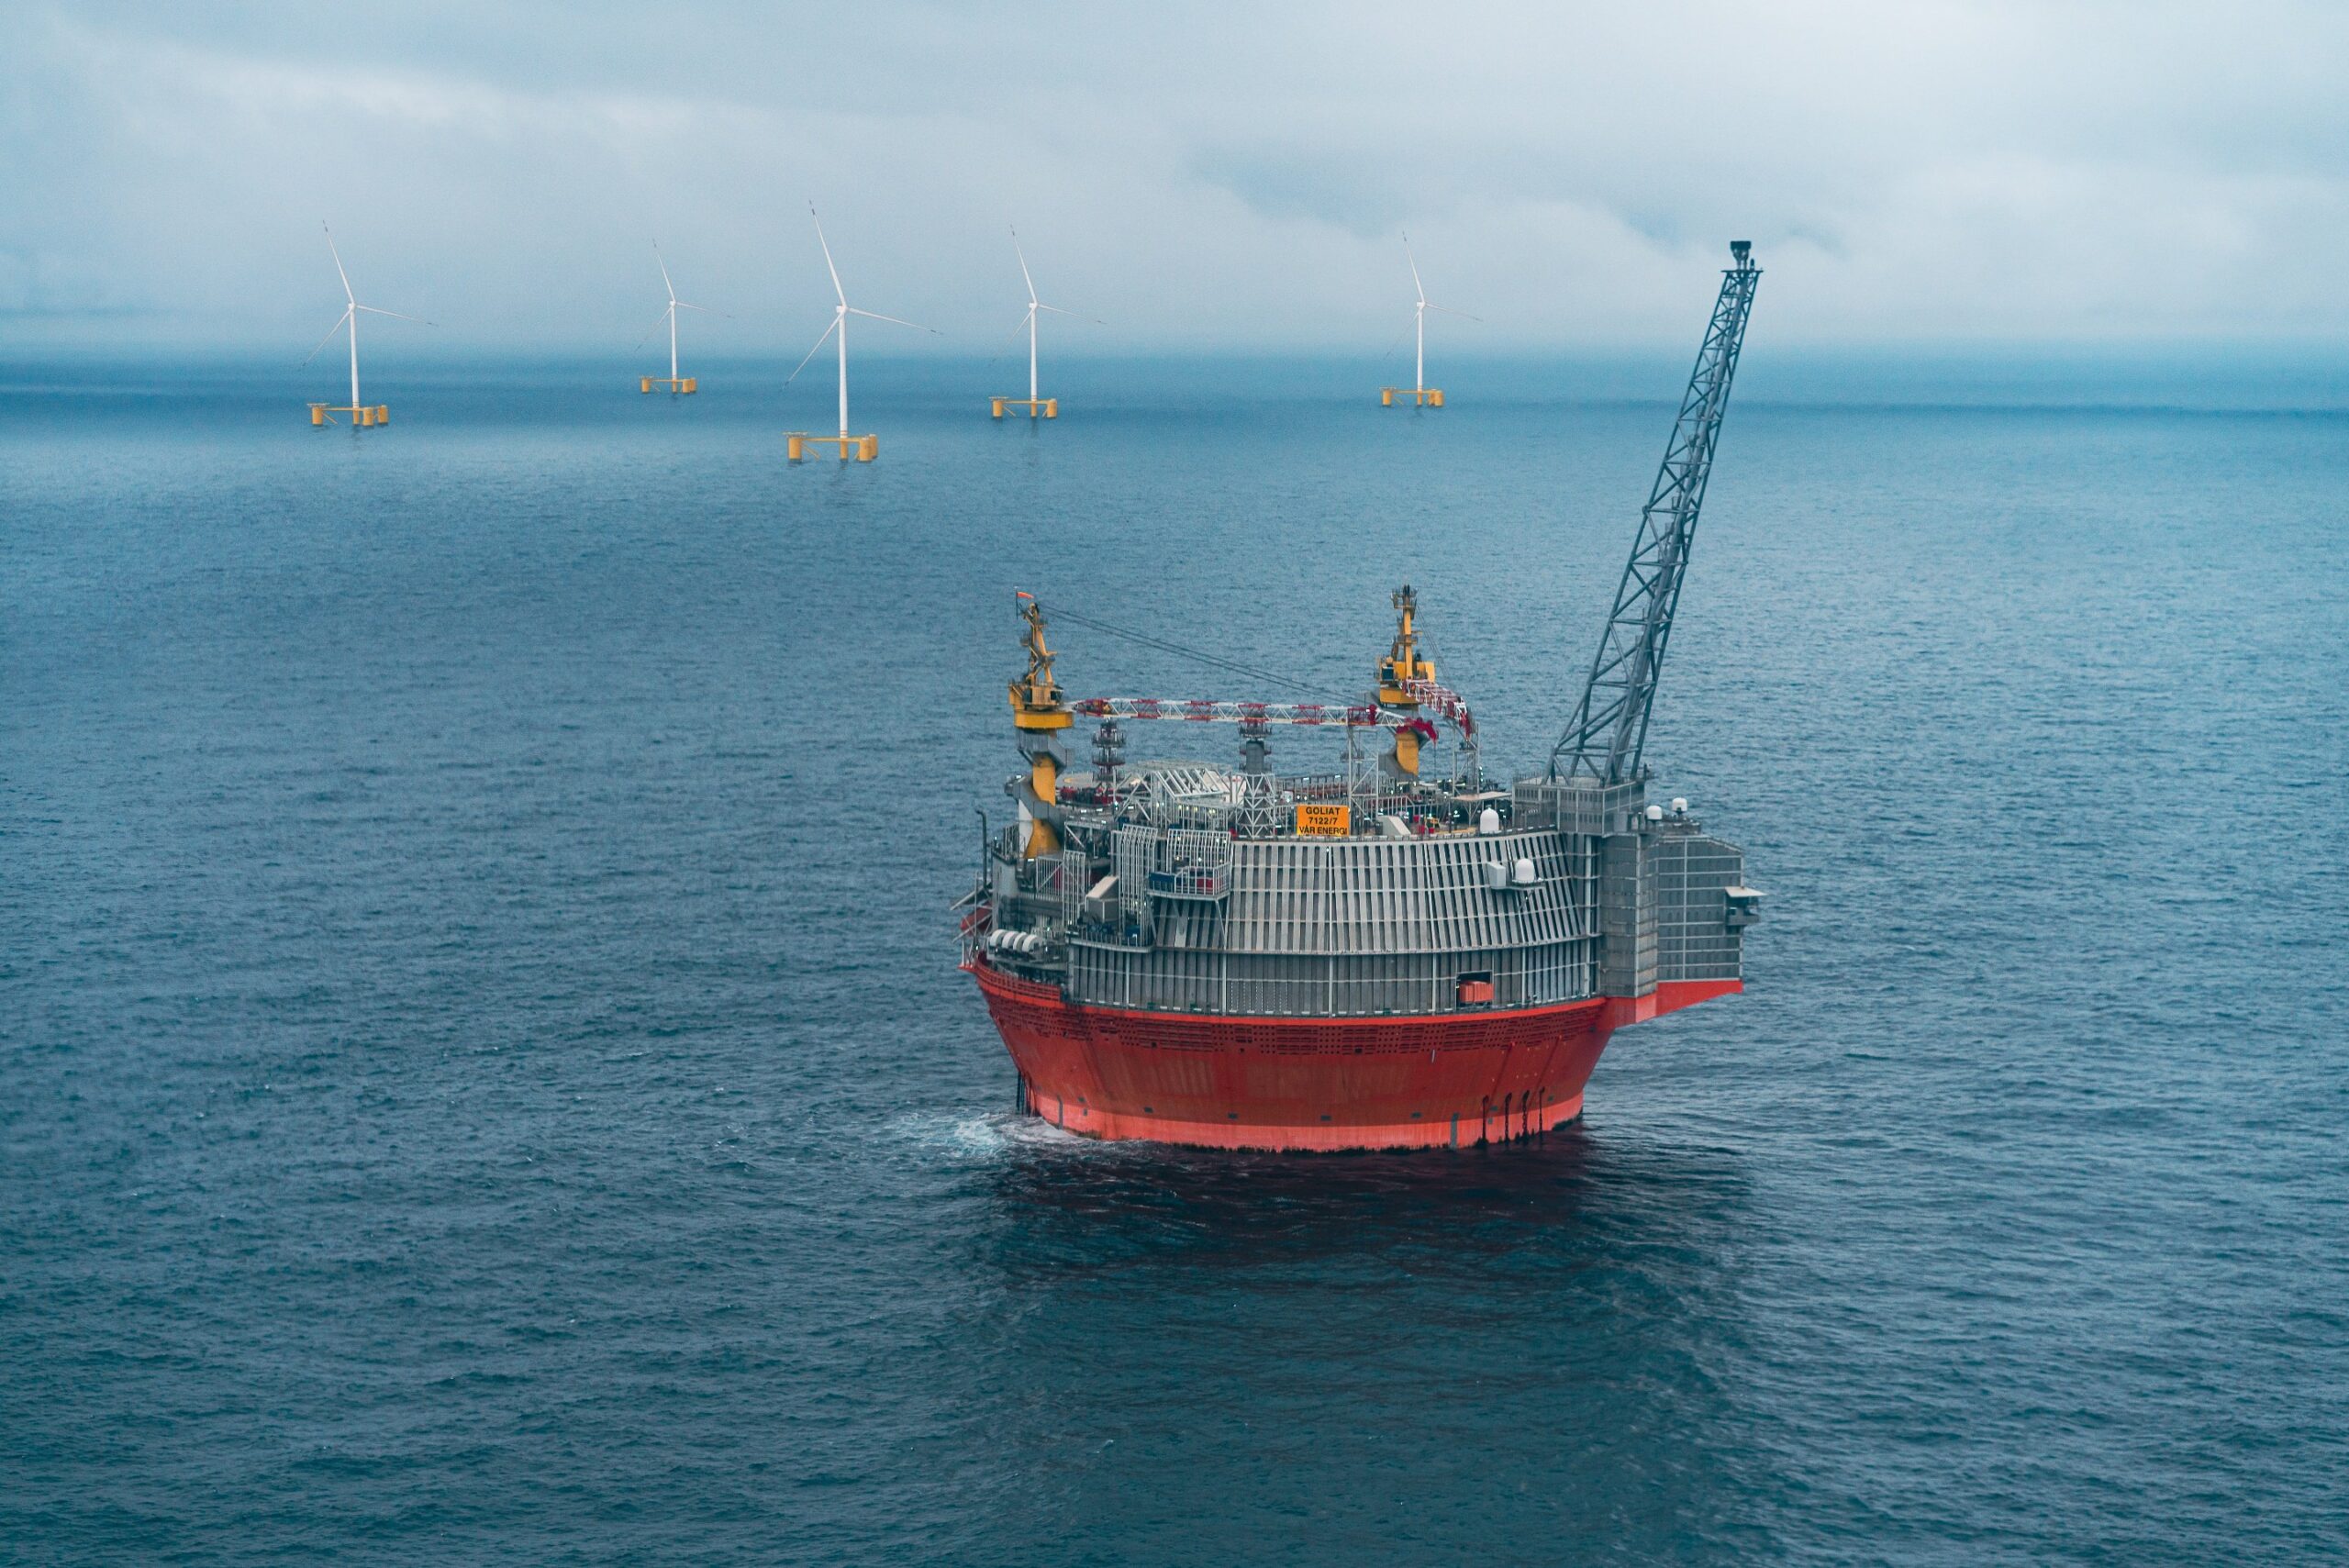 An illustration showing the Goliat FPSO powered by floating offshore wind turbines. Photo courtesy Odfjell Oceanwind